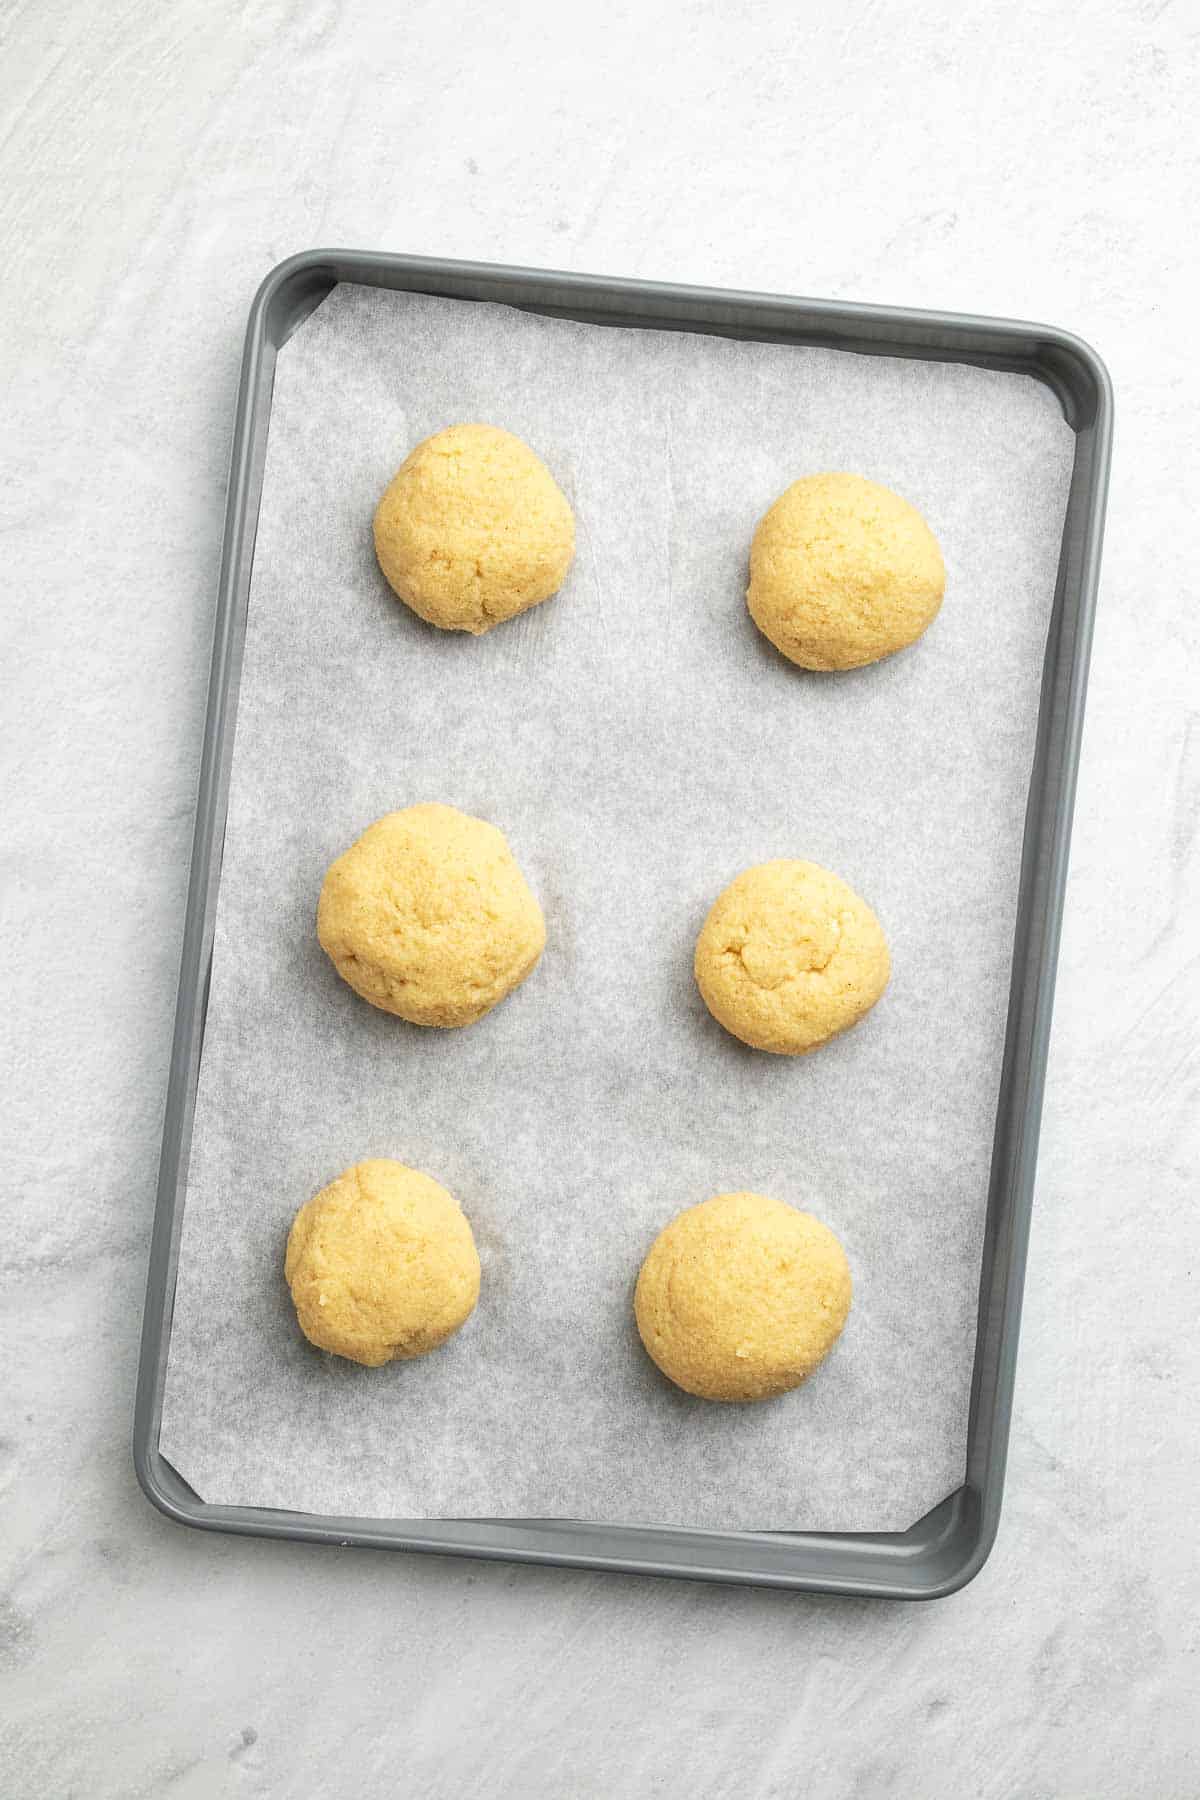 Six dough balls on a baking sheet lined with parchment paper, as seen from above